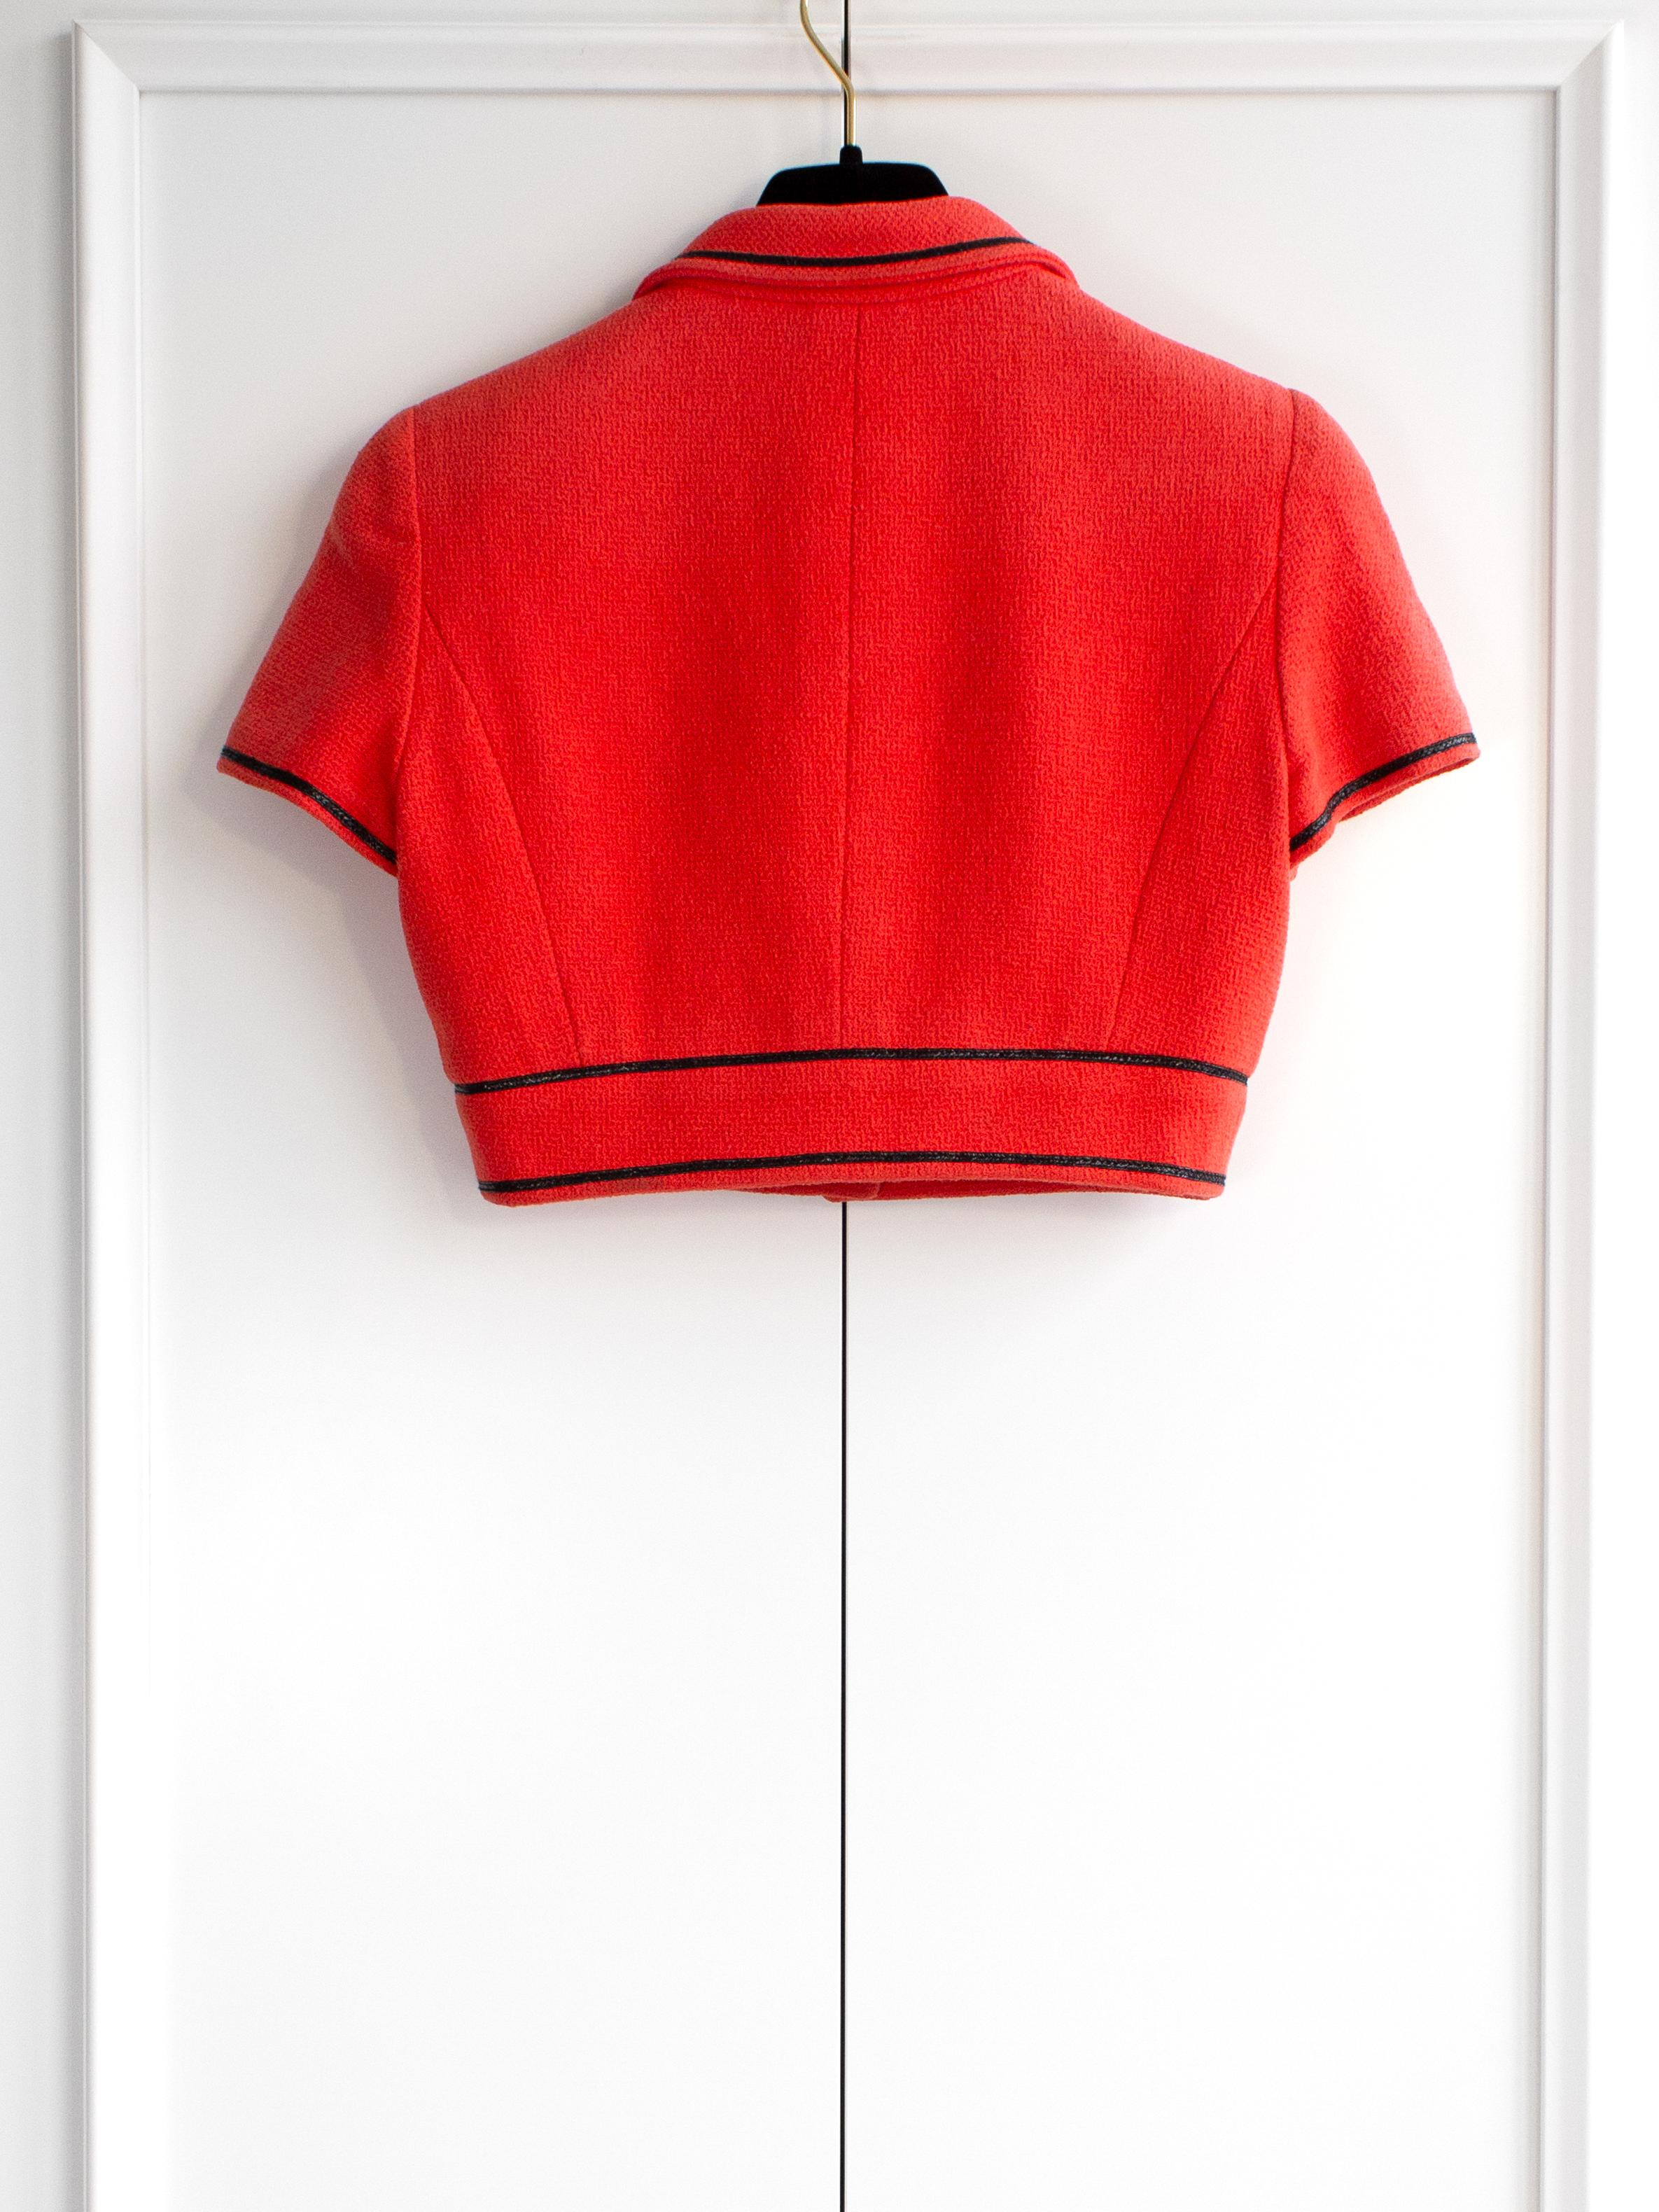 Iconic Chanel Vintage S/S1995 Barbie Cropped Red Black 95P Jacket  For Sale 3